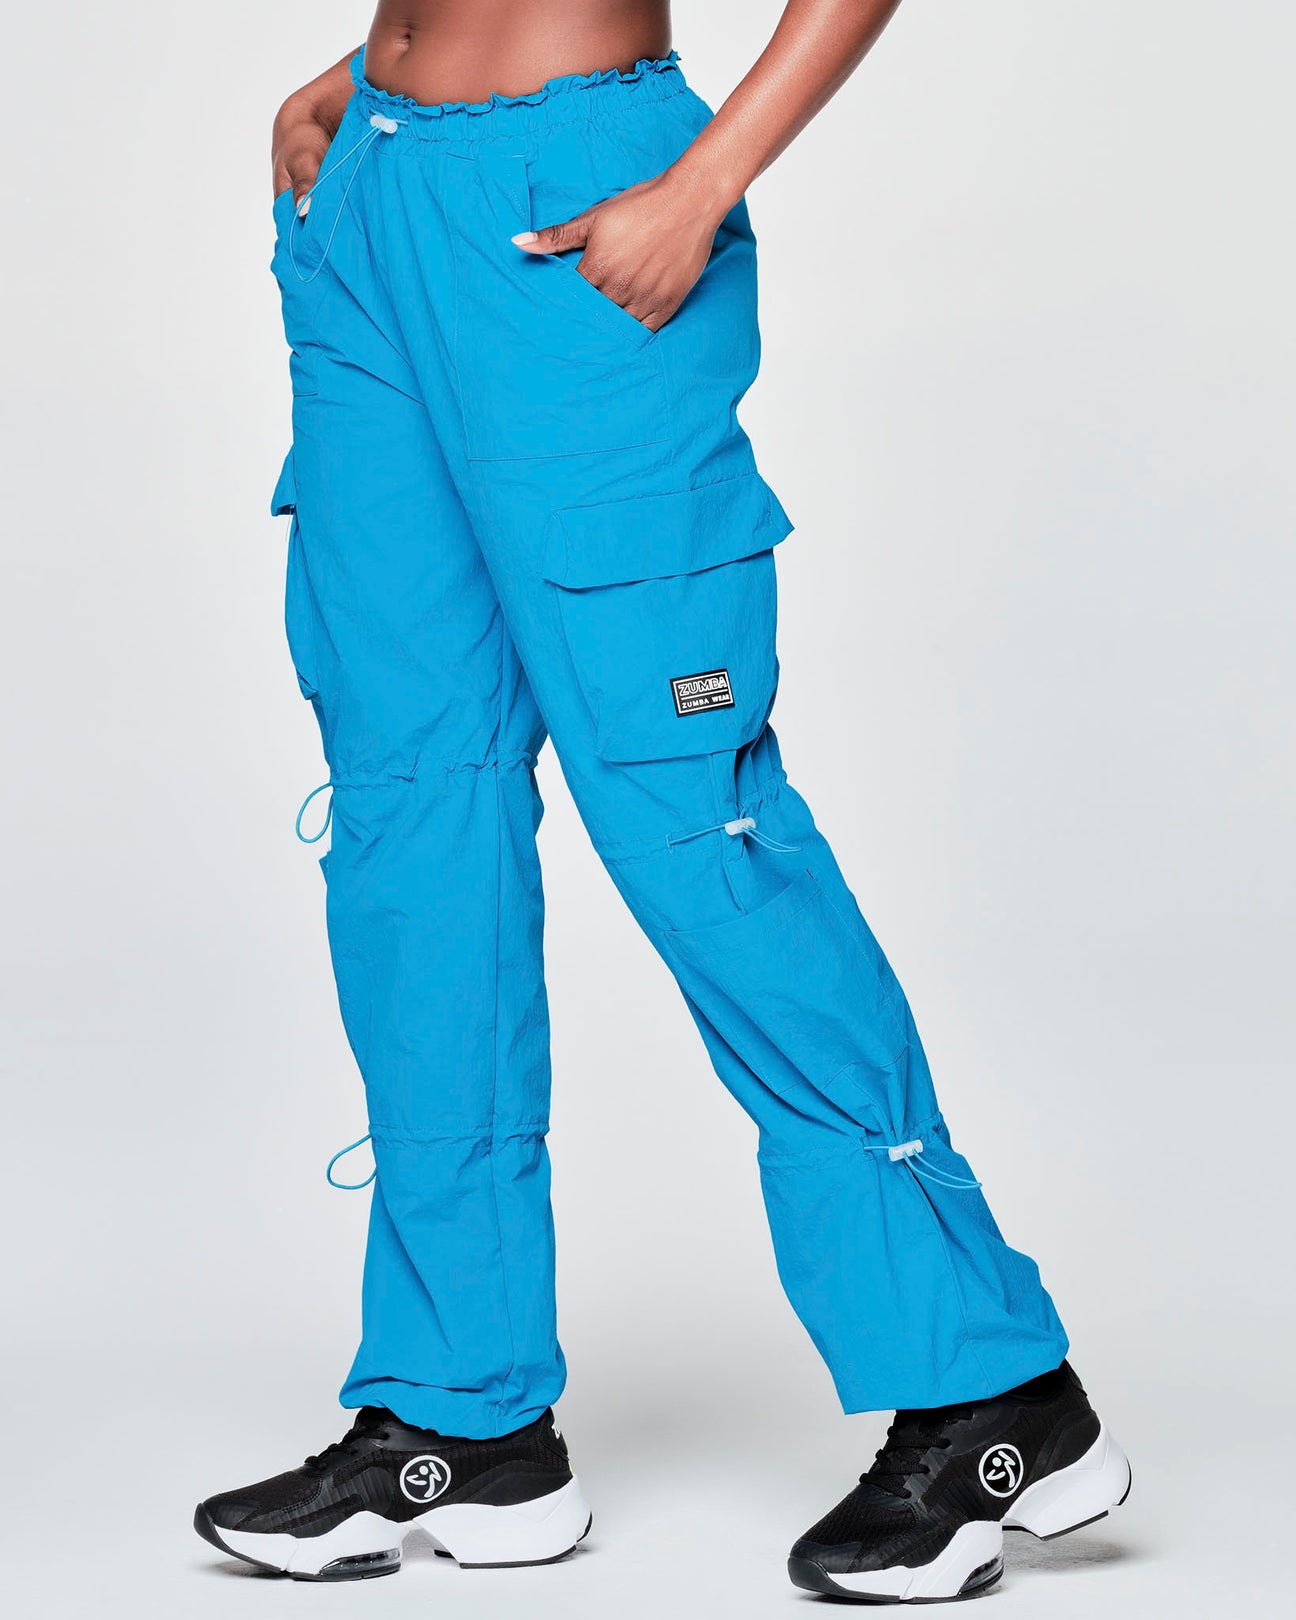  Zumba Fitness Men's Fusion Cargo Pants, Blue, Small : Athletic  Pants : Clothing, Shoes & Jewelry